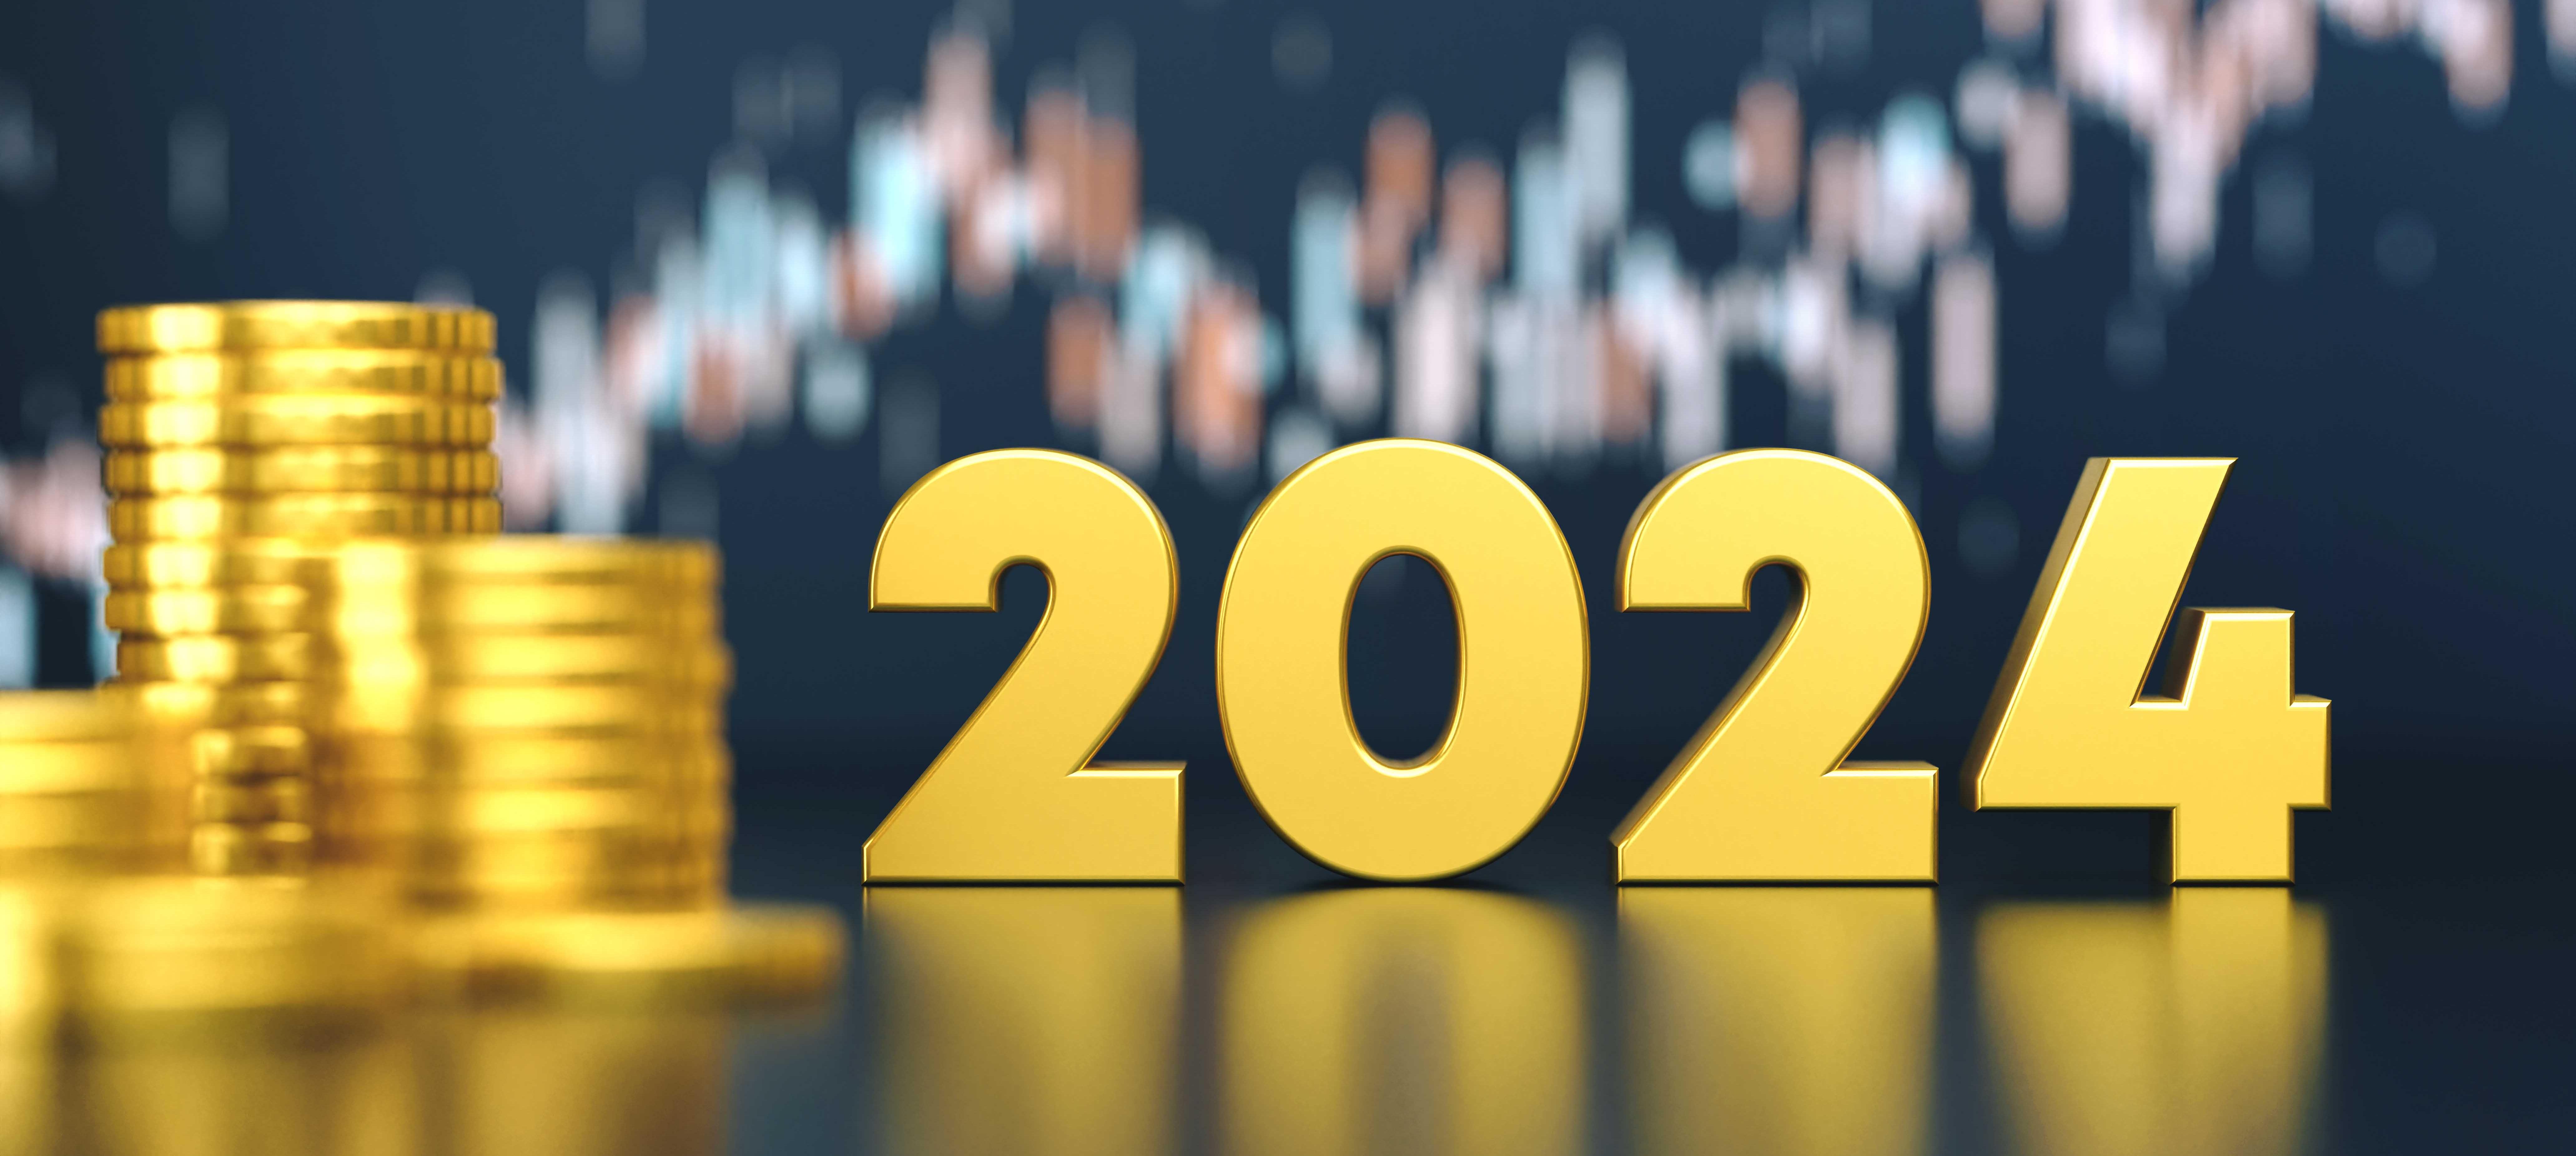 2024 Outlook